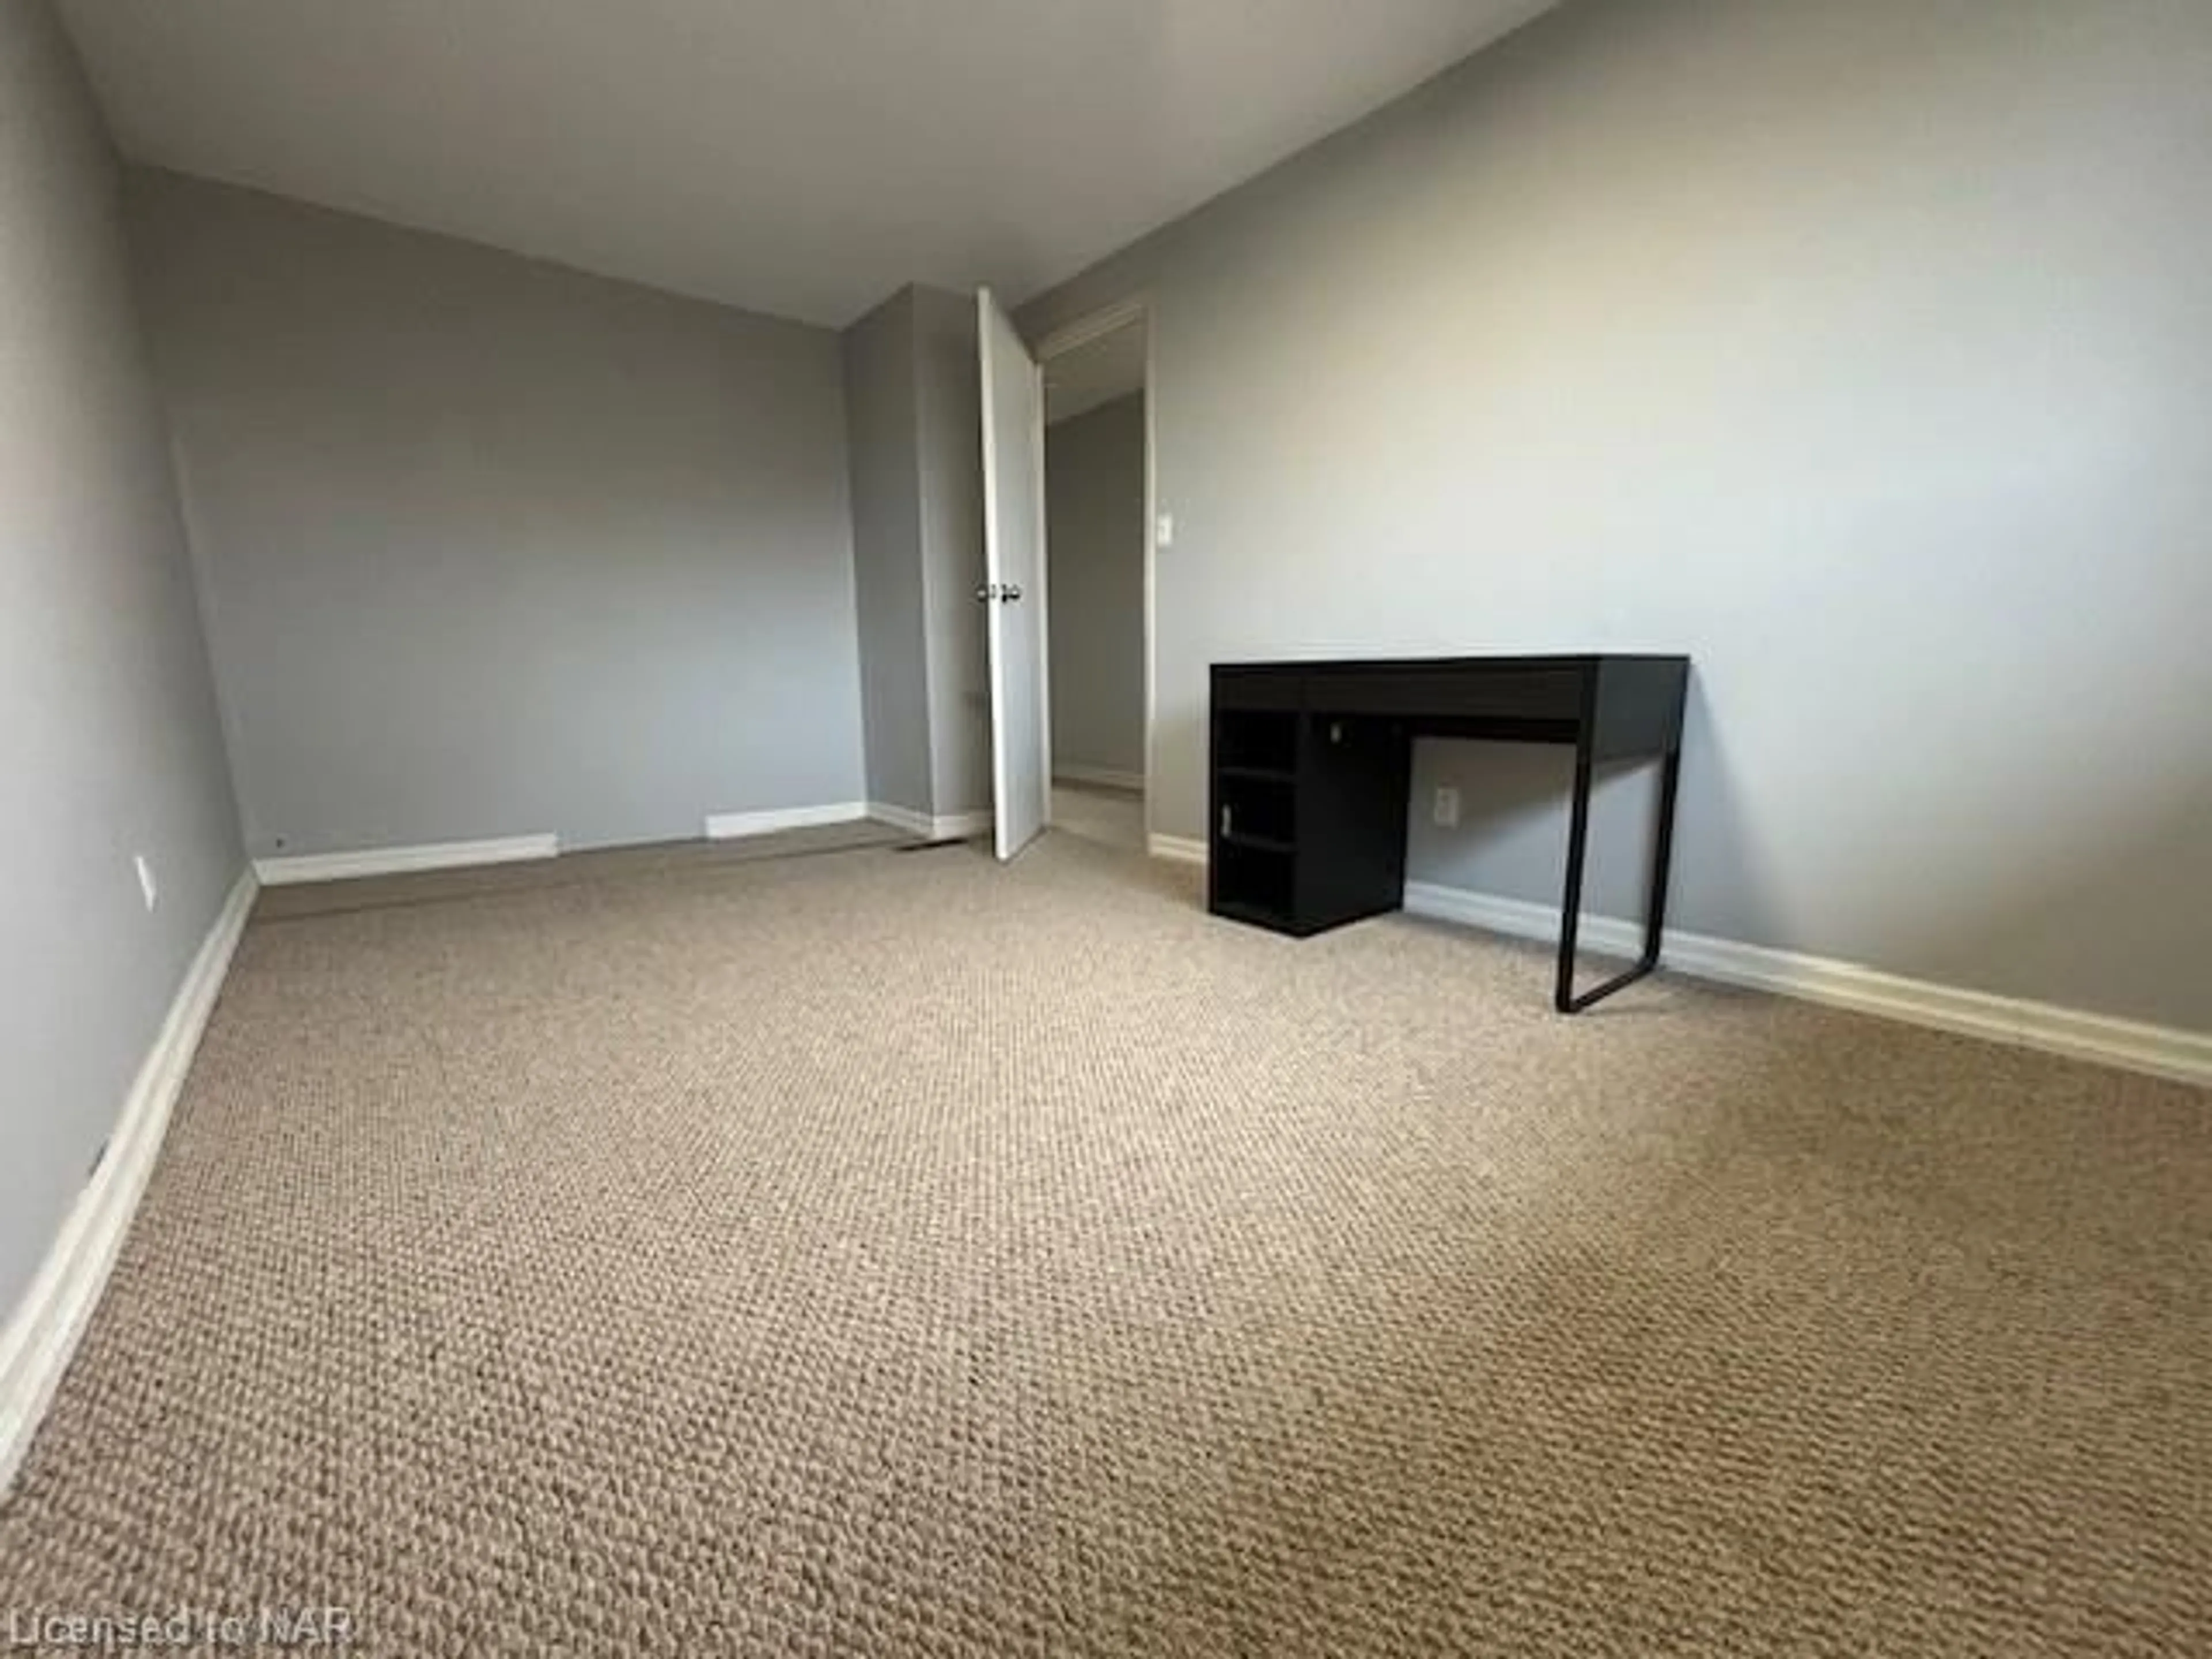 A pic of a room for 151 Linwell Rd #54, St. Catharines Ontario L2N 6P3